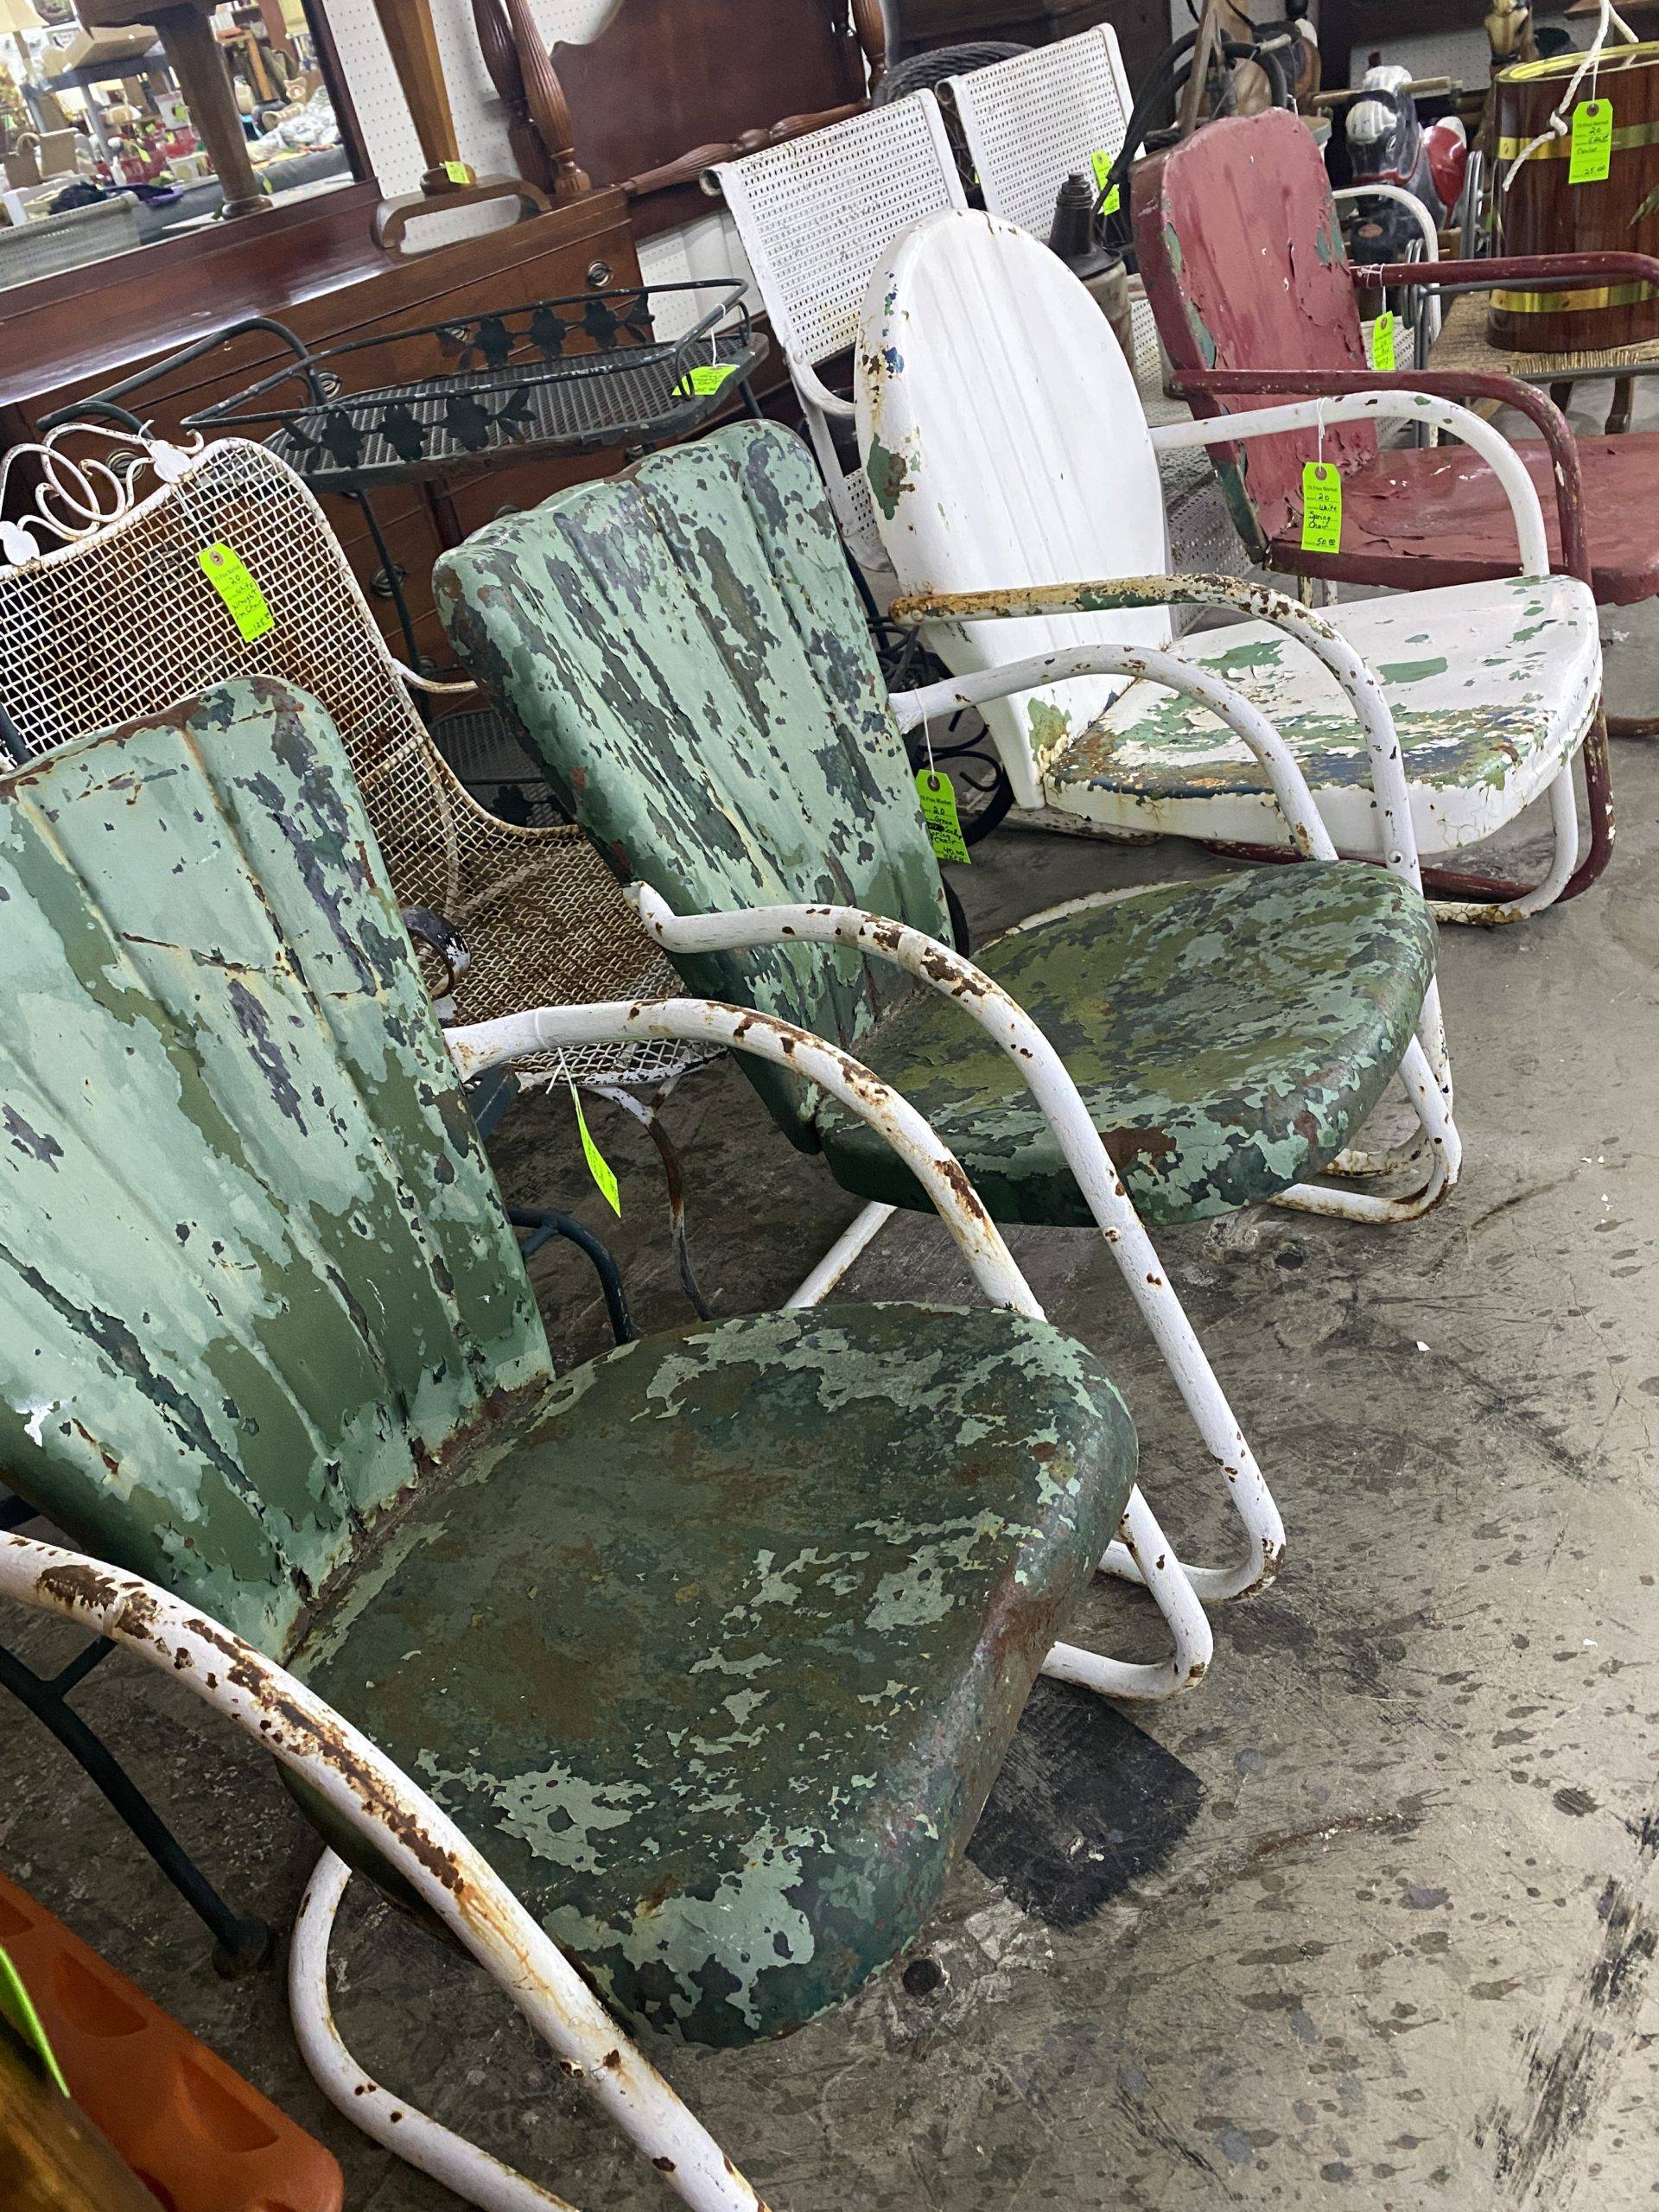 Vintage lawn chairs